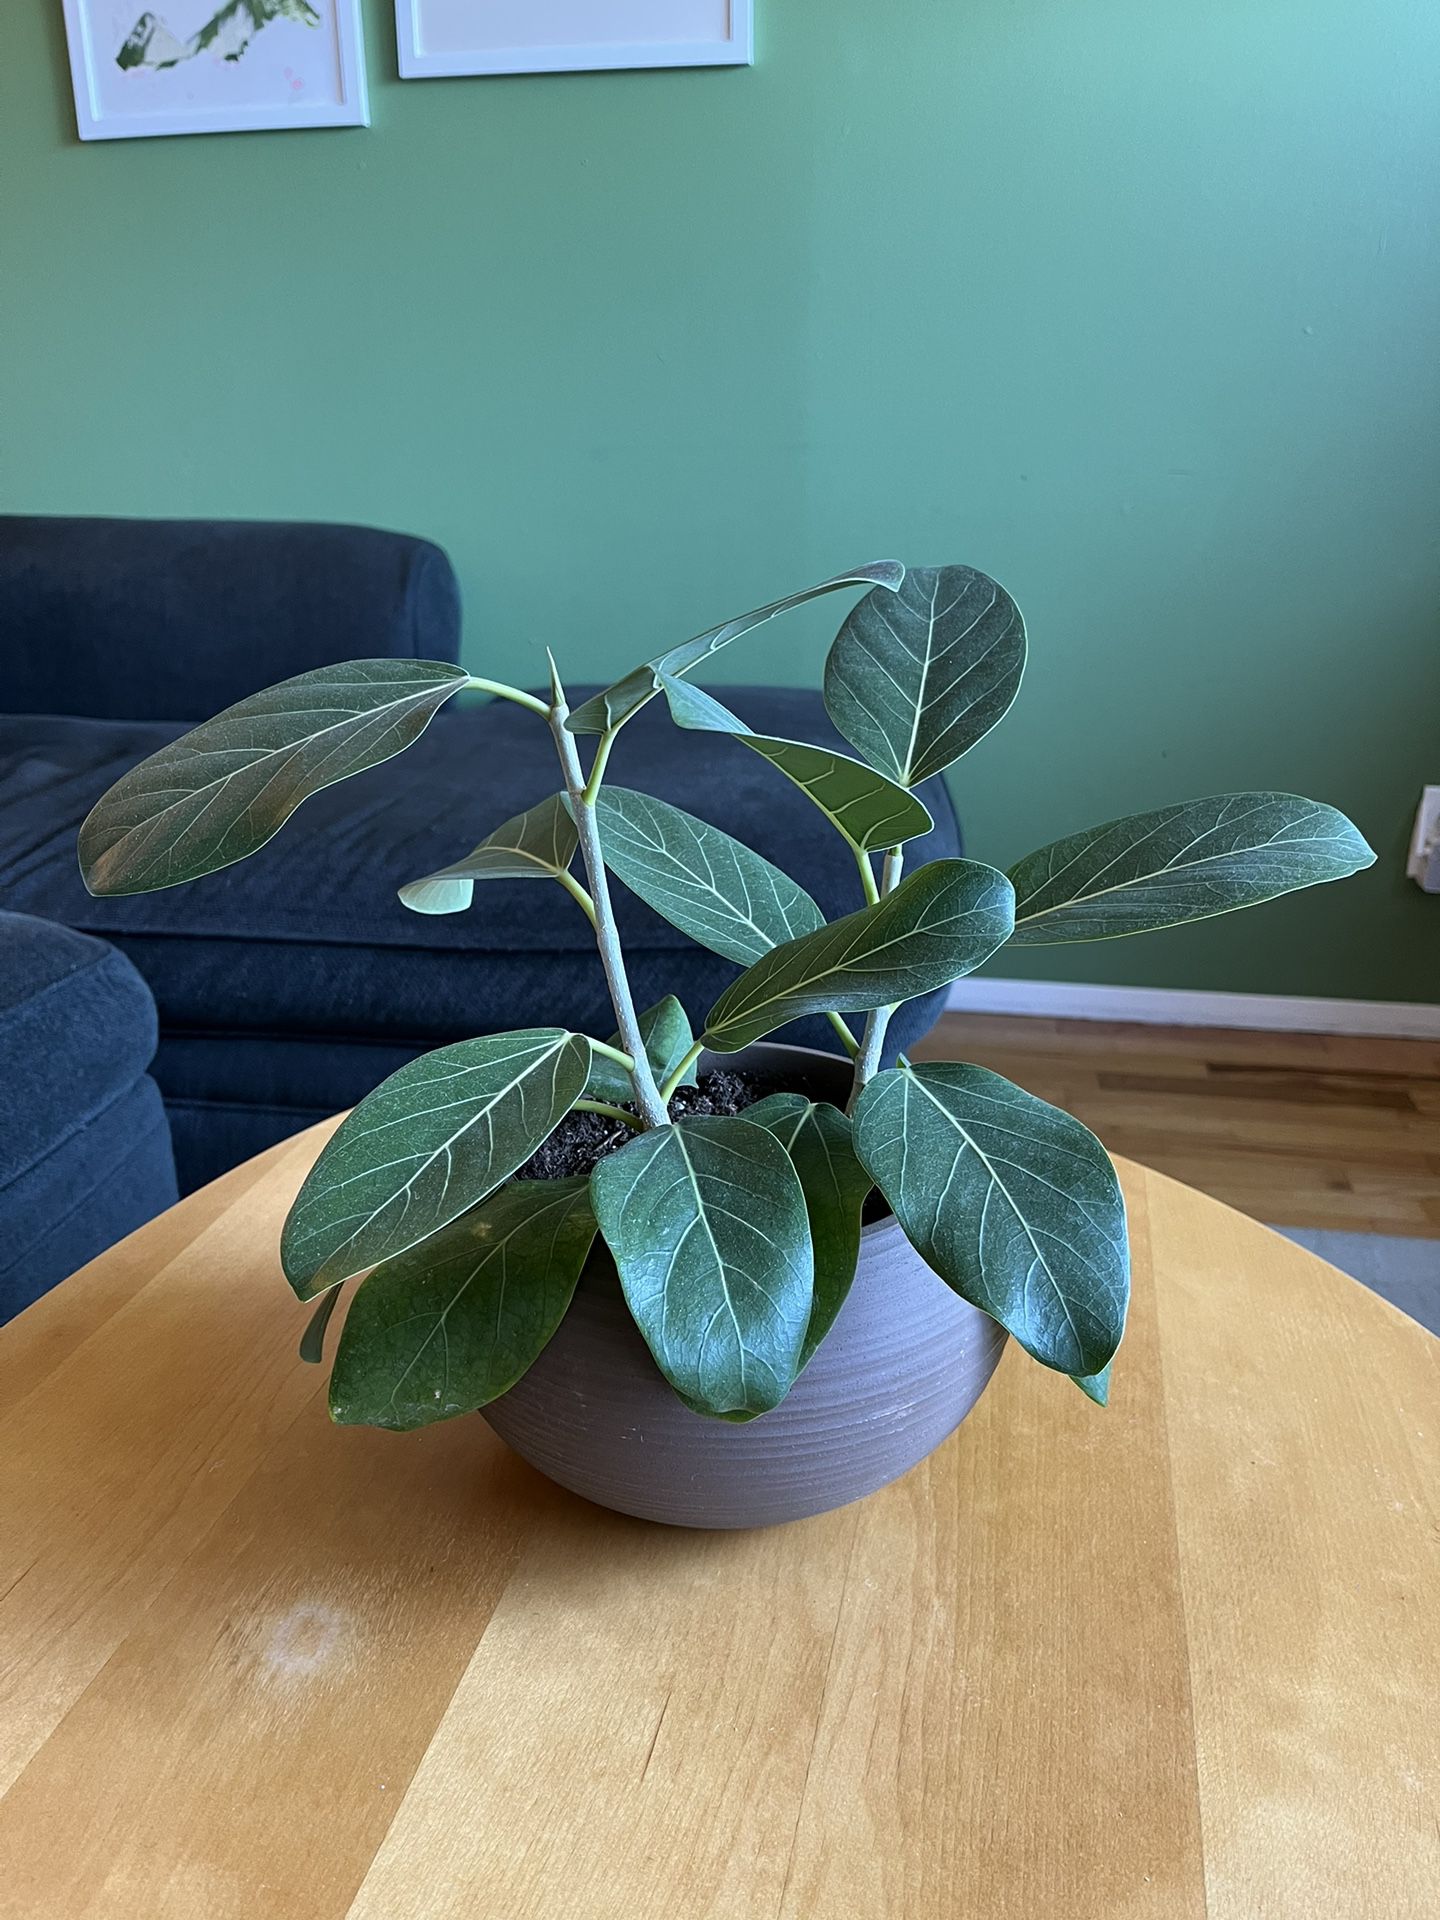 Small House Plant